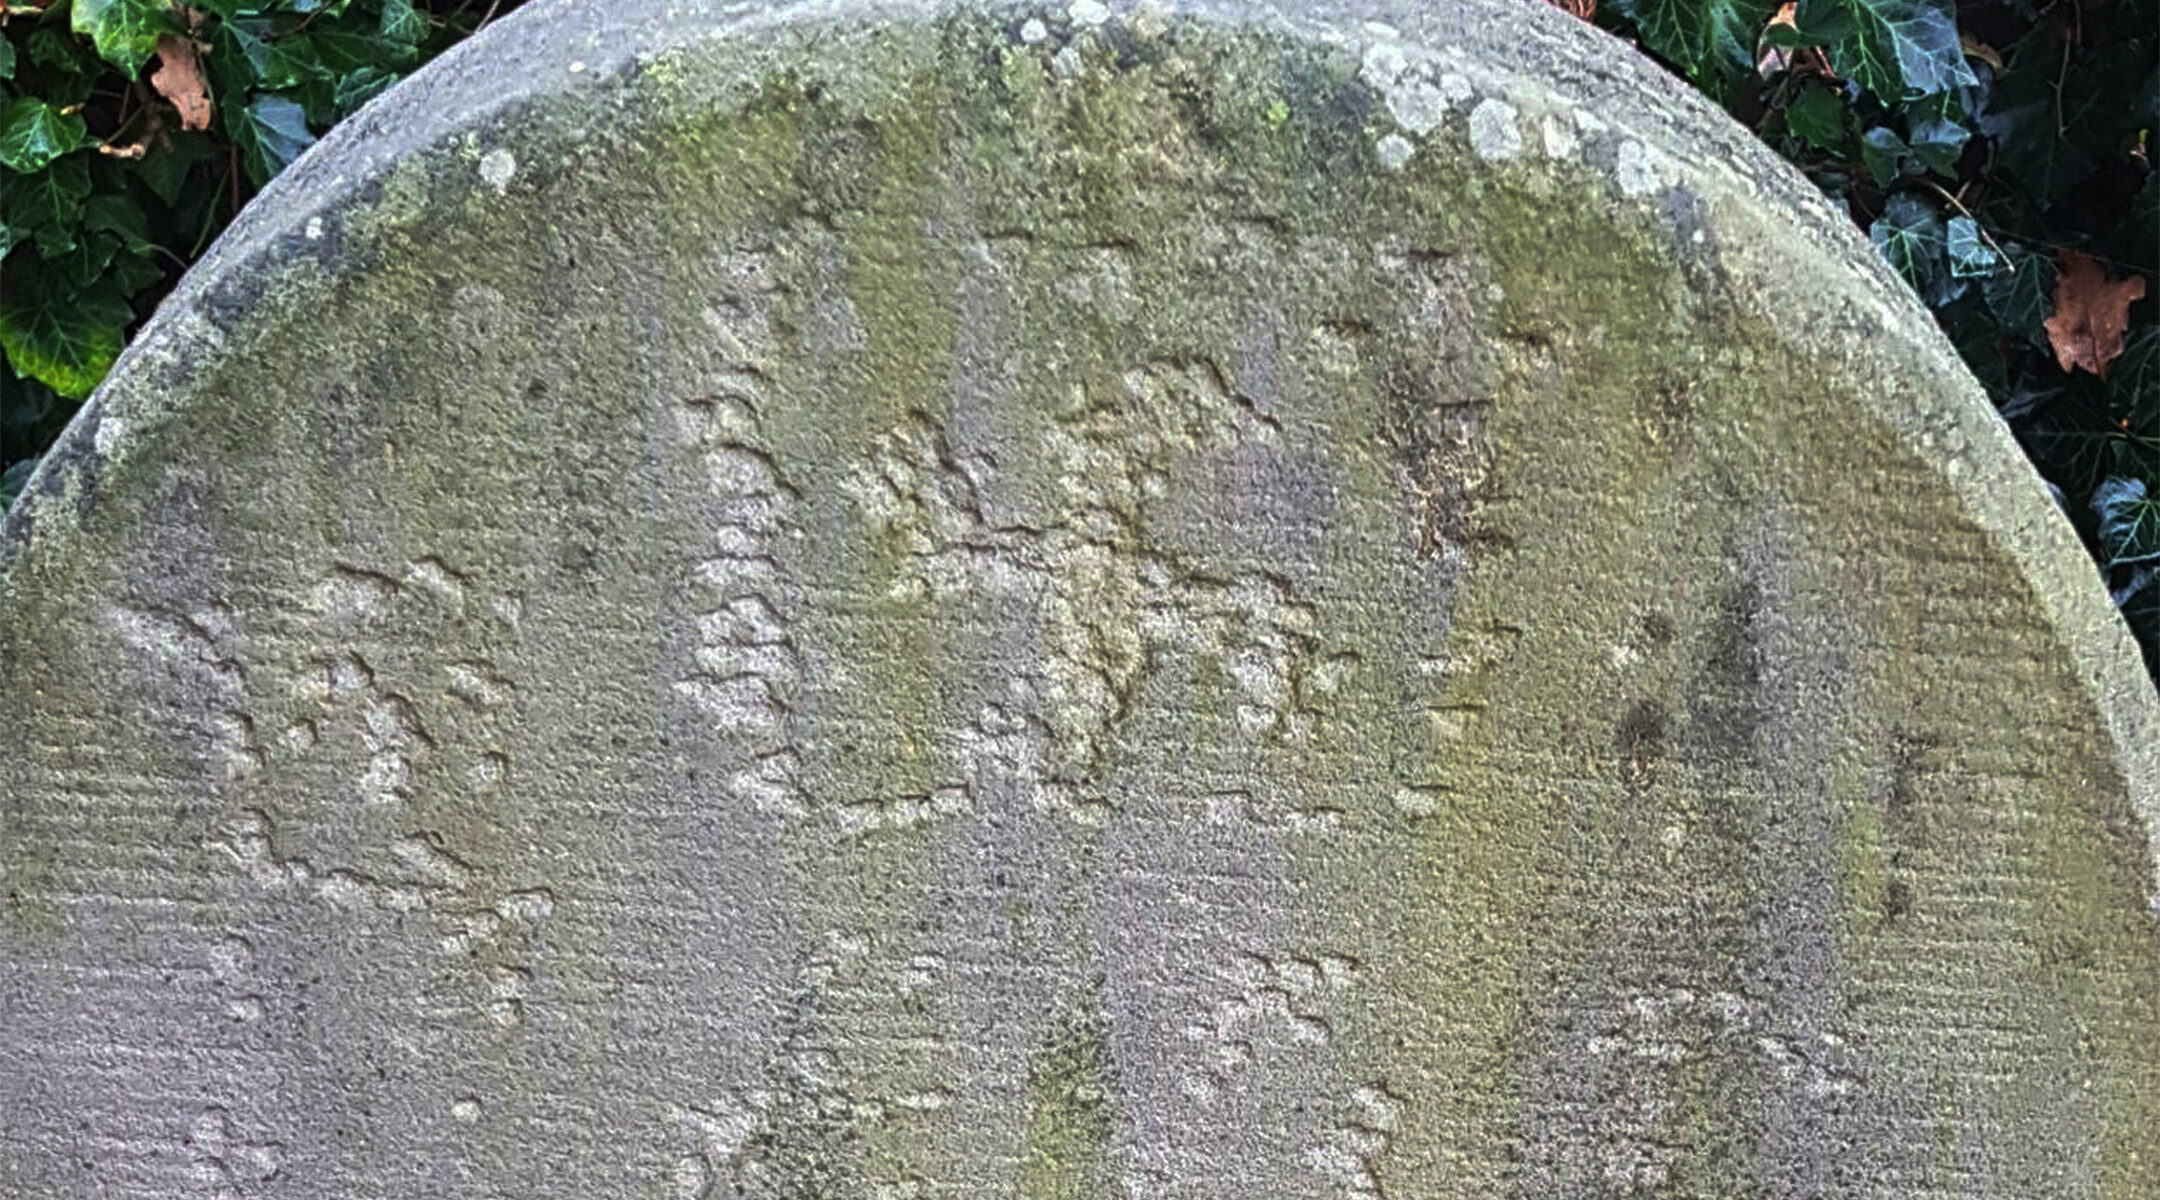 A swastika carved into a headstone at the Jewish cemetery of Haren, Germany in November 2020. (Courtesy of the Jewish Community of Haren/Eli Nahum/Monitoring Antisemitism Worldwide)